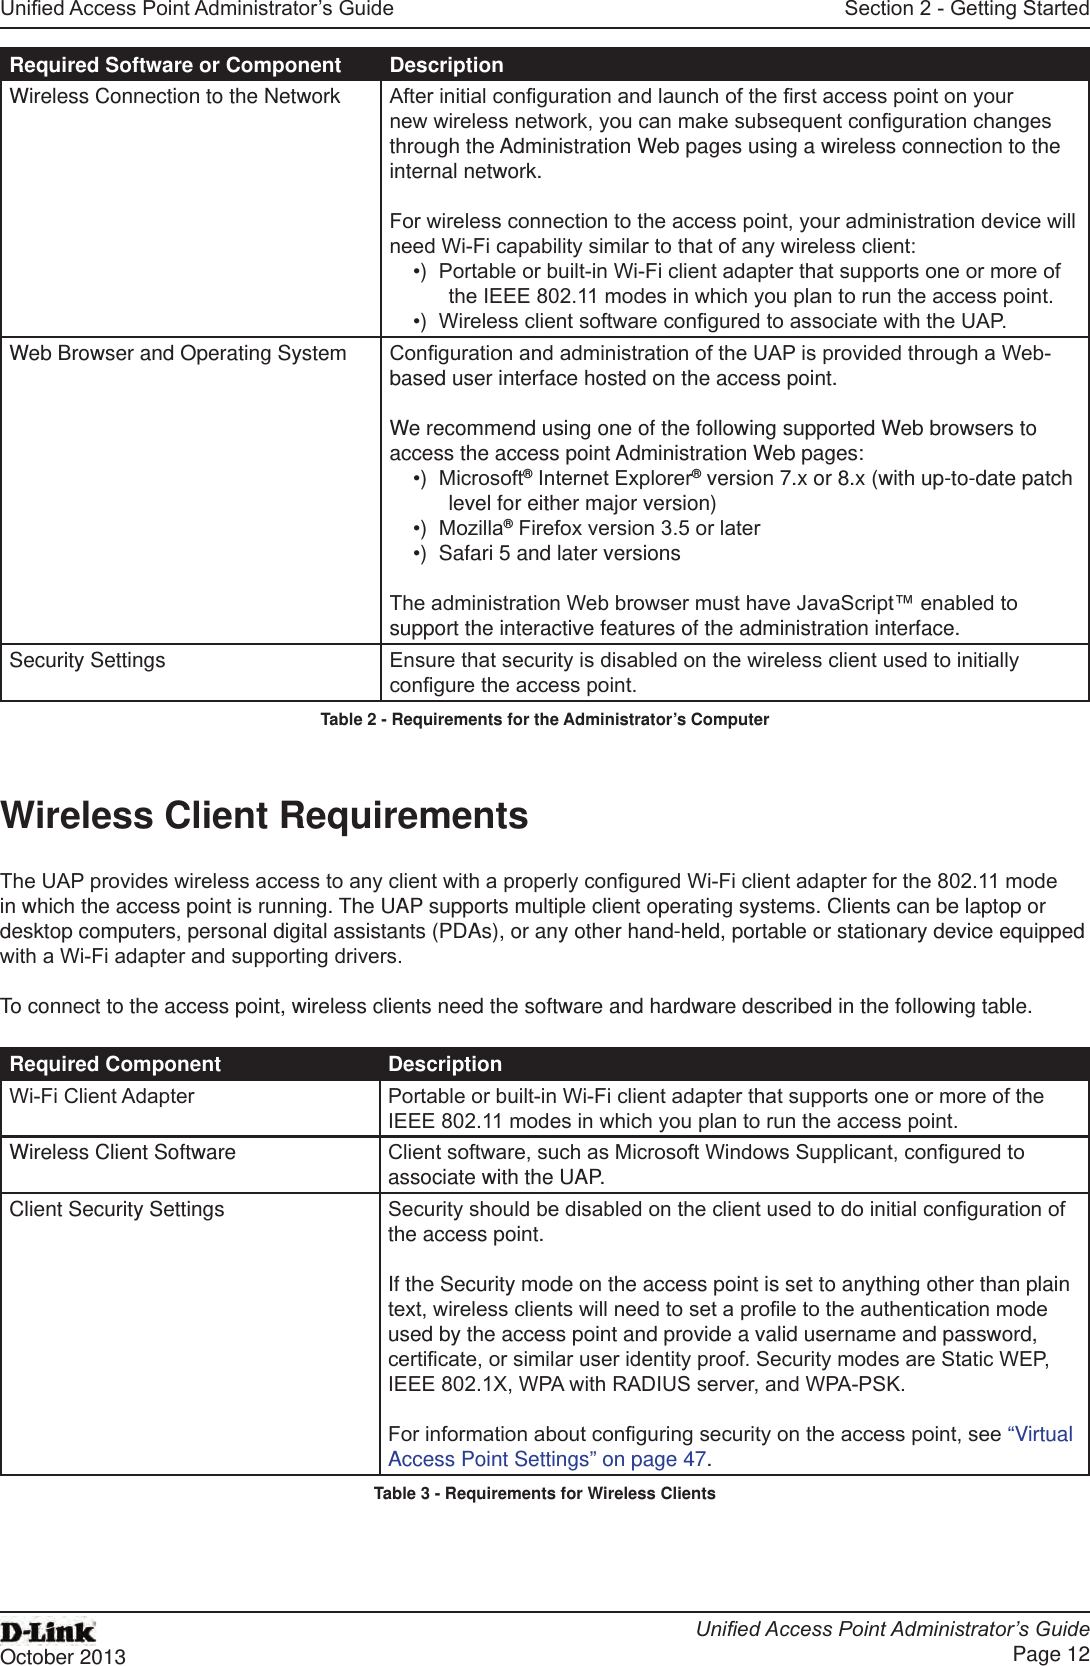 Unied Access Point Administrator’s GuideUnied Access Point Administrator’s GuidePage 12October 2013Section 2 - Getting StartedRequired Software or Component DescriptionWireless Connection to the Network After initial conguration and launch of the rst access point on your new wireless network, you can make subsequent conguration changes through the Administration Web pages using a wireless connection to the internal network. For wireless connection to the access point, your administration device will need Wi-Fi capability similar to that of any wireless client:•)  Portable or built-in Wi-Fi client adapter that supports one or more of the IEEE 802.11 modes in which you plan to run the access point.•)  Wireless client software congured to associate with the UAP.Web Browser and Operating System Conguration and administration of the UAP is provided through a Web-based user interface hosted on the access point. We recommend using one of the following supported Web browsers to access the access point Administration Web pages:•)  Microsoft® Internet Explorer® version 7.x or 8.x (with up-to-date patch level for either major version)•)  Mozilla® Firefox version 3.5 or later•)  Safari 5 and later versionsThe administration Web browser must have JavaScript™ enabled to support the interactive features of the administration interface.Security Settings Ensure that security is disabled on the wireless client used to initially congure the access point.Table 2 - Requirements for the Administrator’s ComputerWireless Client RequirementsThe UAP provides wireless access to any client with a properly congured Wi-Fi client adapter for the 802.11 mode in which the access point is running. The UAP supports multiple client operating systems. Clients can be laptop or desktop computers, personal digital assistants (PDAs), or any other hand-held, portable or stationary device equipped with a Wi-Fi adapter and supporting drivers.To connect to the access point, wireless clients need the software and hardware described in the following table.Required Component DescriptionWi-Fi Client Adapter Portable or built-in Wi-Fi client adapter that supports one or more of the IEEE 802.11 modes in which you plan to run the access point.Wireless Client Software Client software, such as Microsoft Windows Supplicant, congured to associate with the UAP.Client Security Settings Security should be disabled on the client used to do initial conguration of the access point.If the Security mode on the access point is set to anything other than plain text, wireless clients will need to set a prole to the authentication mode used by the access point and provide a valid username and password, certicate, or similar user identity proof. Security modes are Static WEP, IEEE 802.1X, WPA with RADIUS server, and WPA-PSK.For information about conguring security on the access point, see “Virtual Access Point Settings” on page 47. Table 3 - Requirements for Wireless Clients